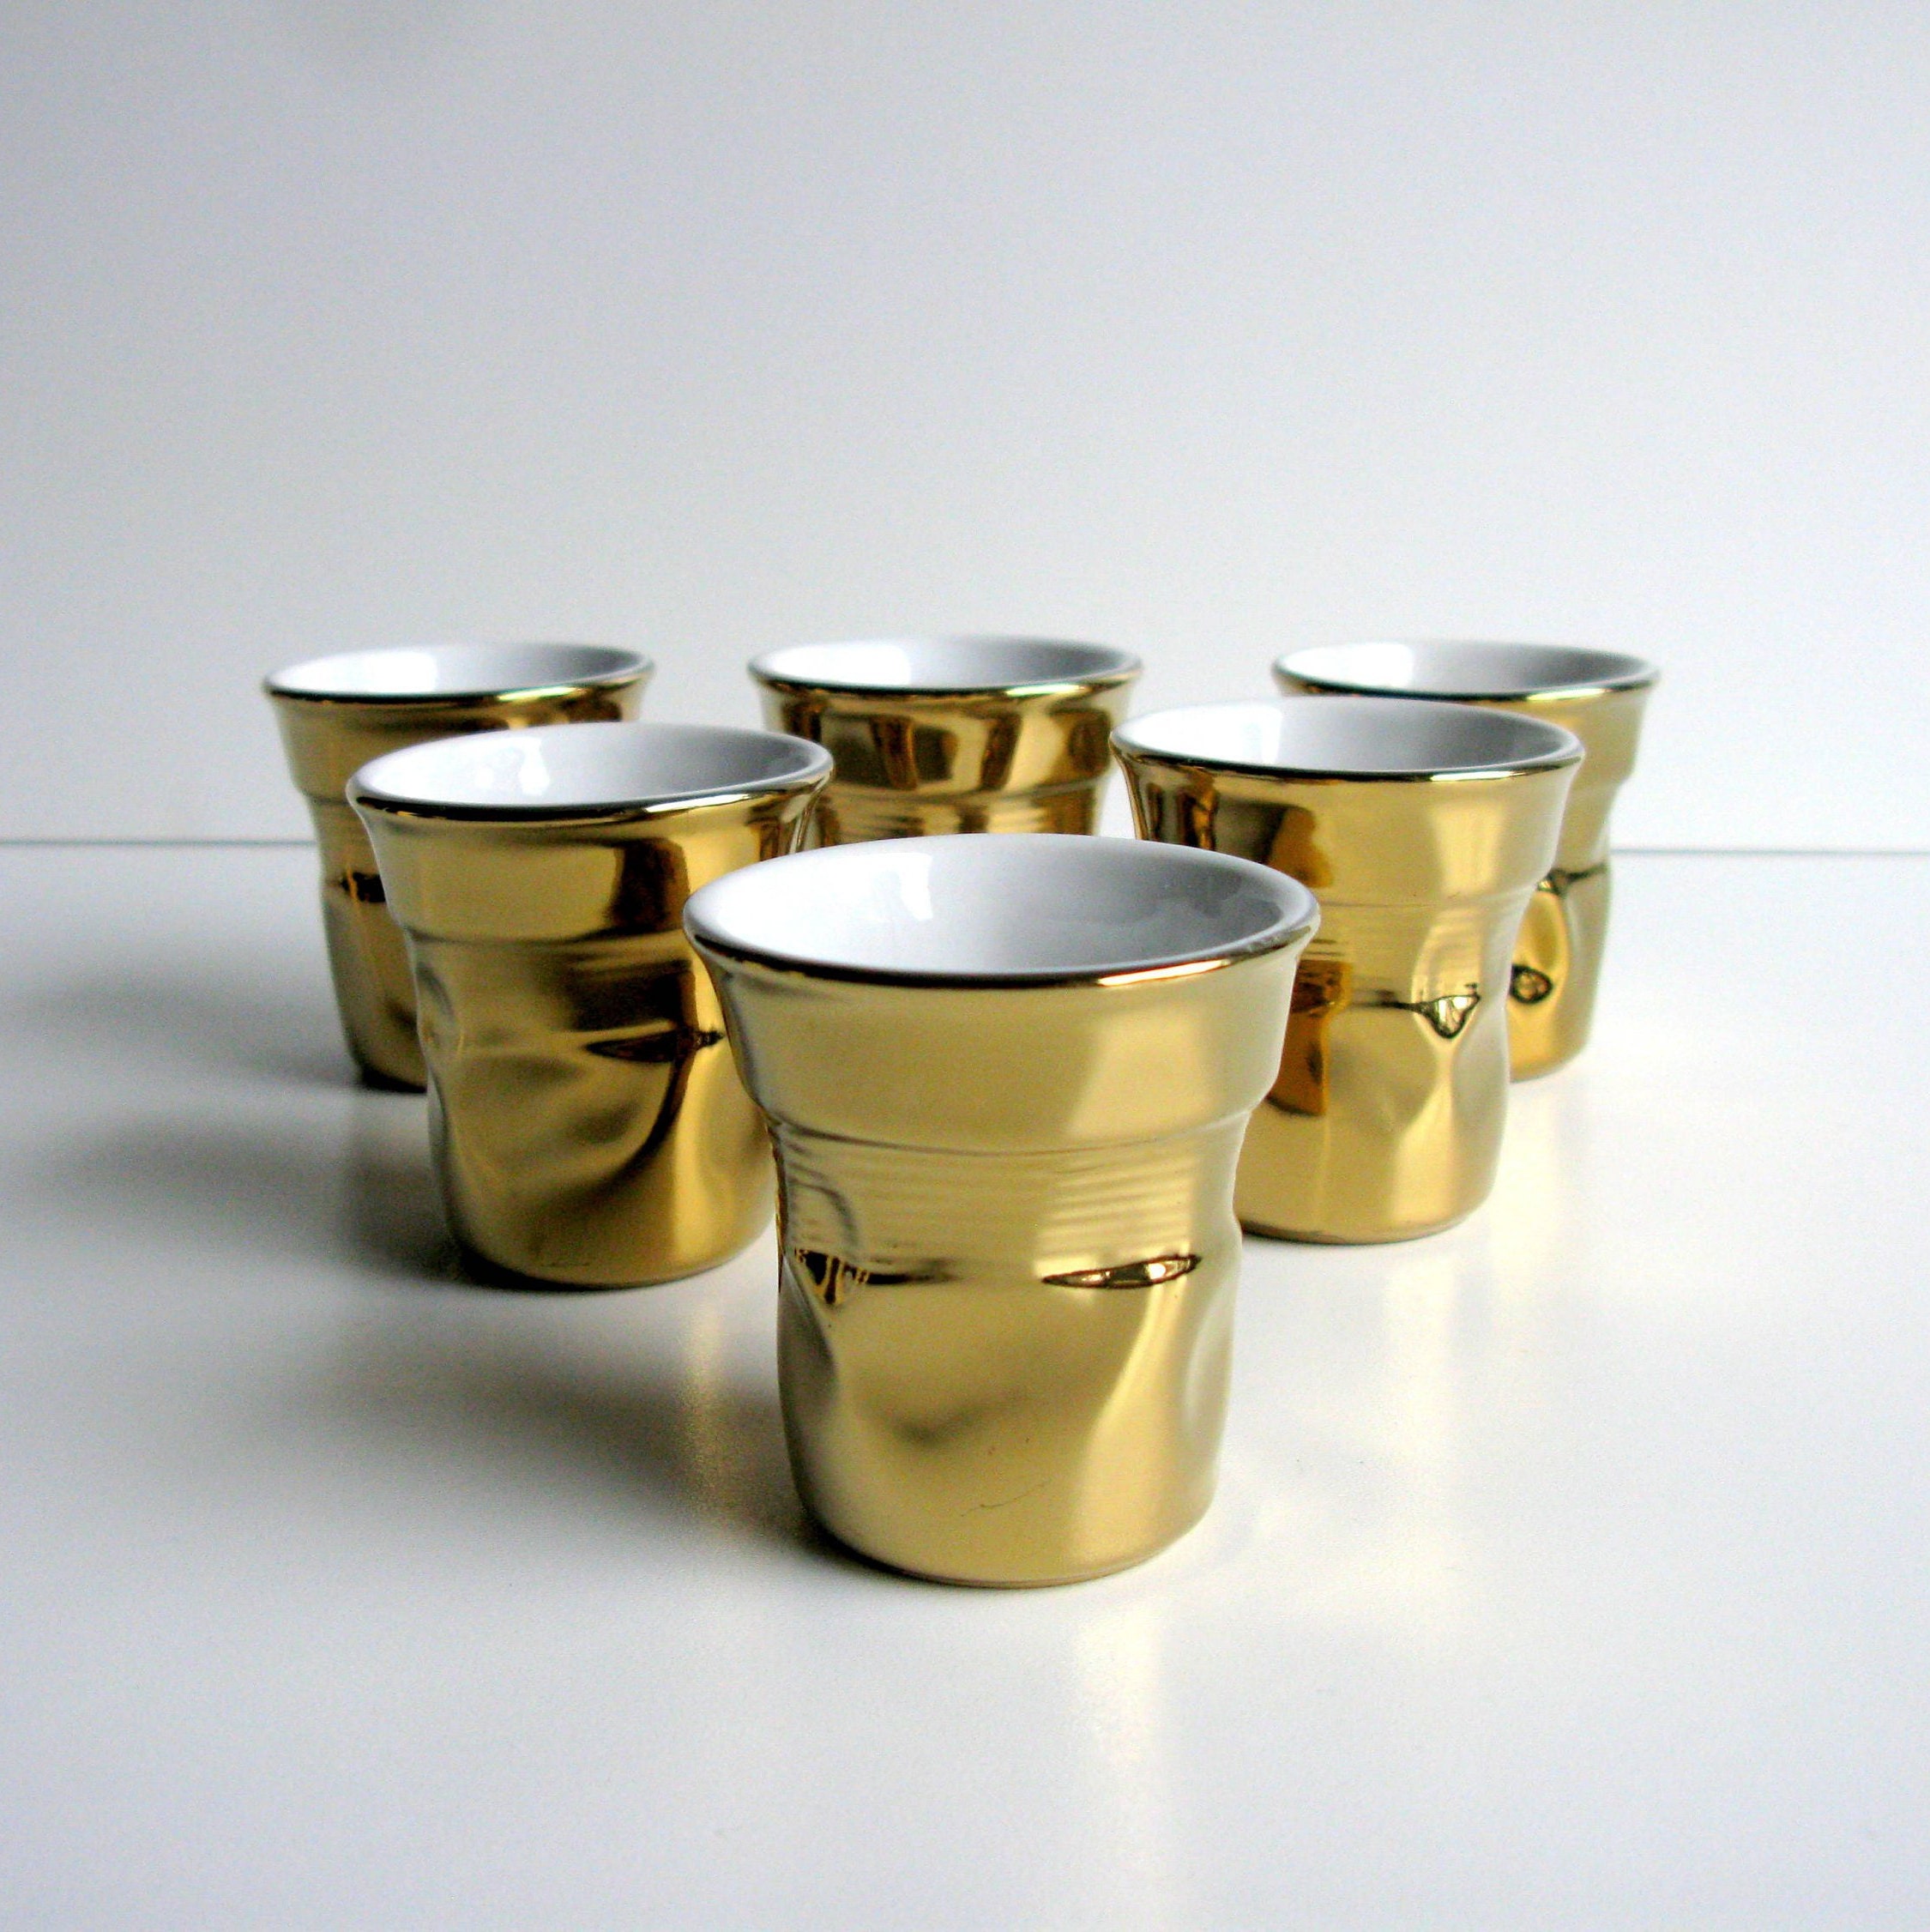 BIALETTI / Espresso Cup Set / Italian / Espresso Cups / Gold Cups /  Porcelain Cups / Set of 6 / Limited Edition / Gold / Crumbled Cup/ Italy 